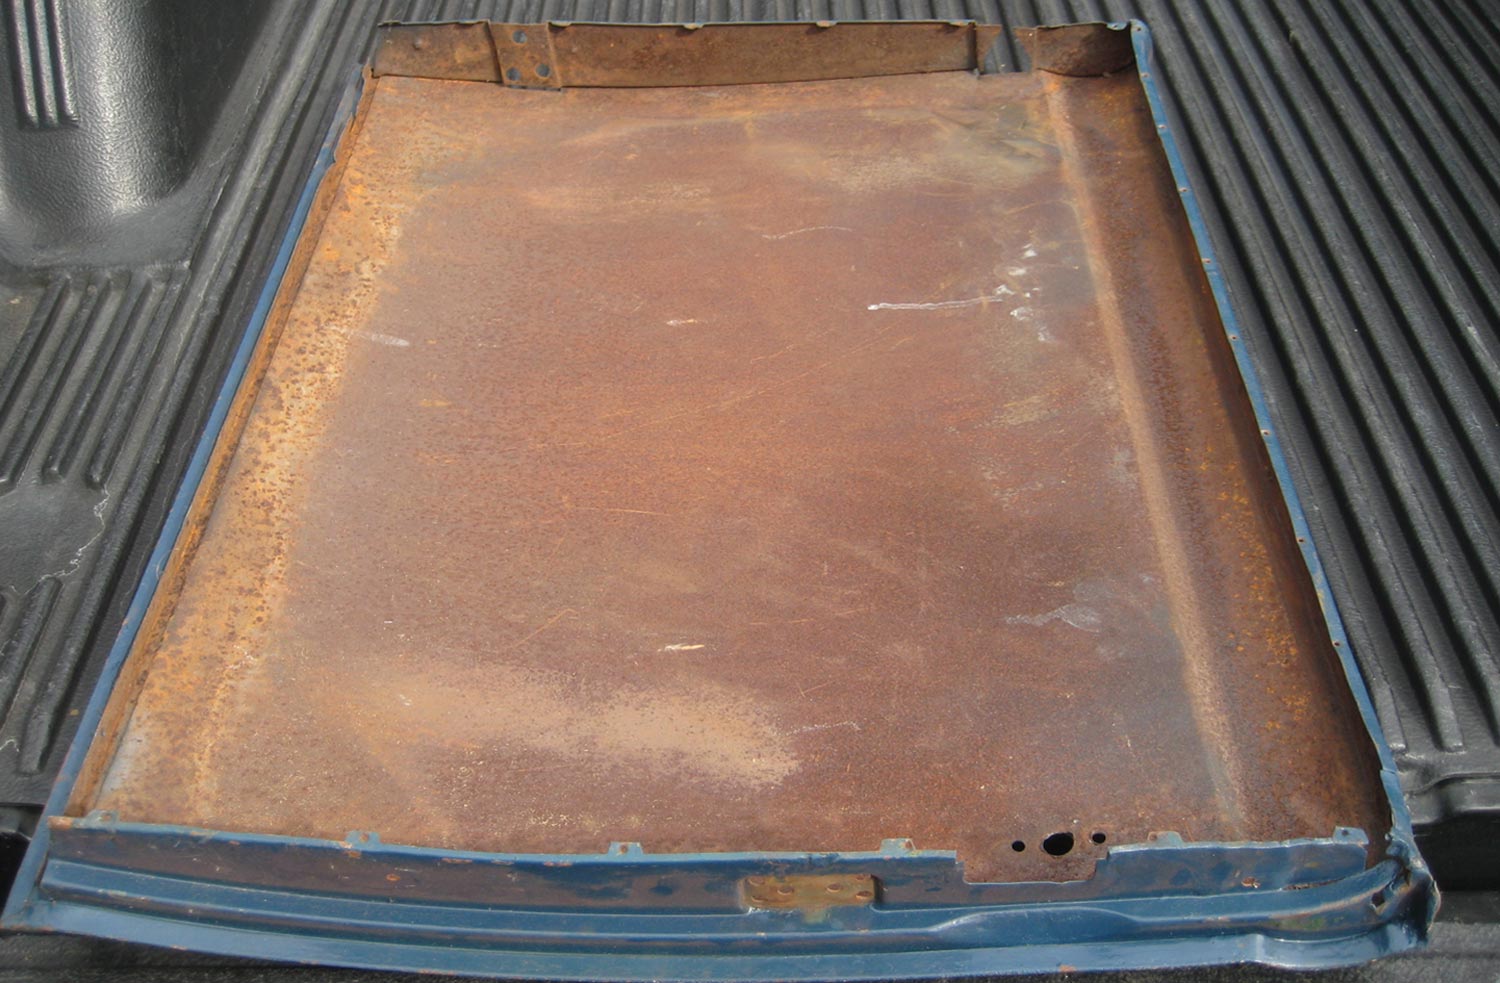 inside view of the driver side door showing a coat of surface rust